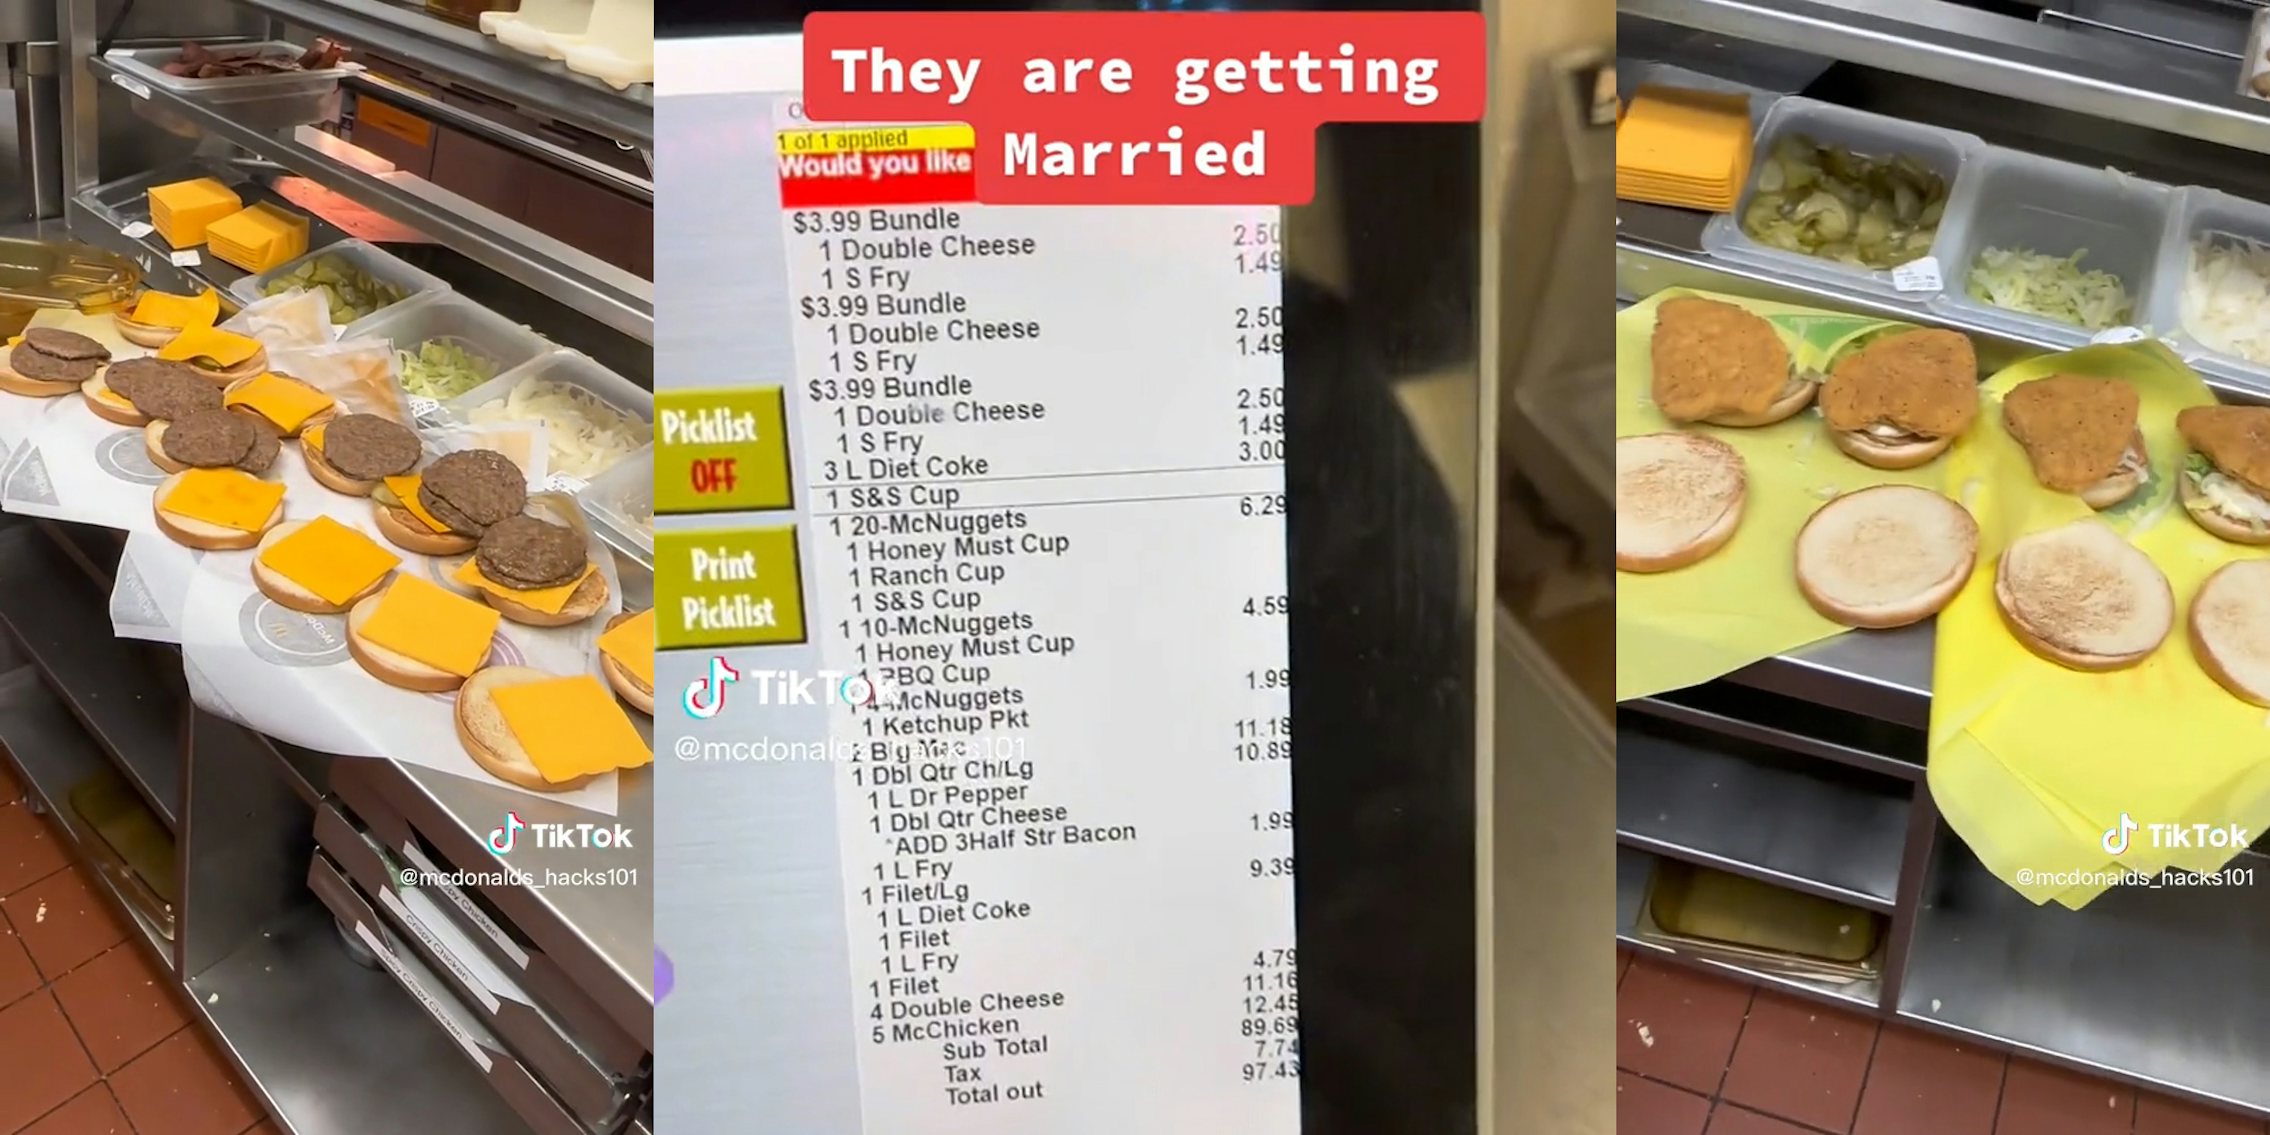 mcdonald's food being made for wedding